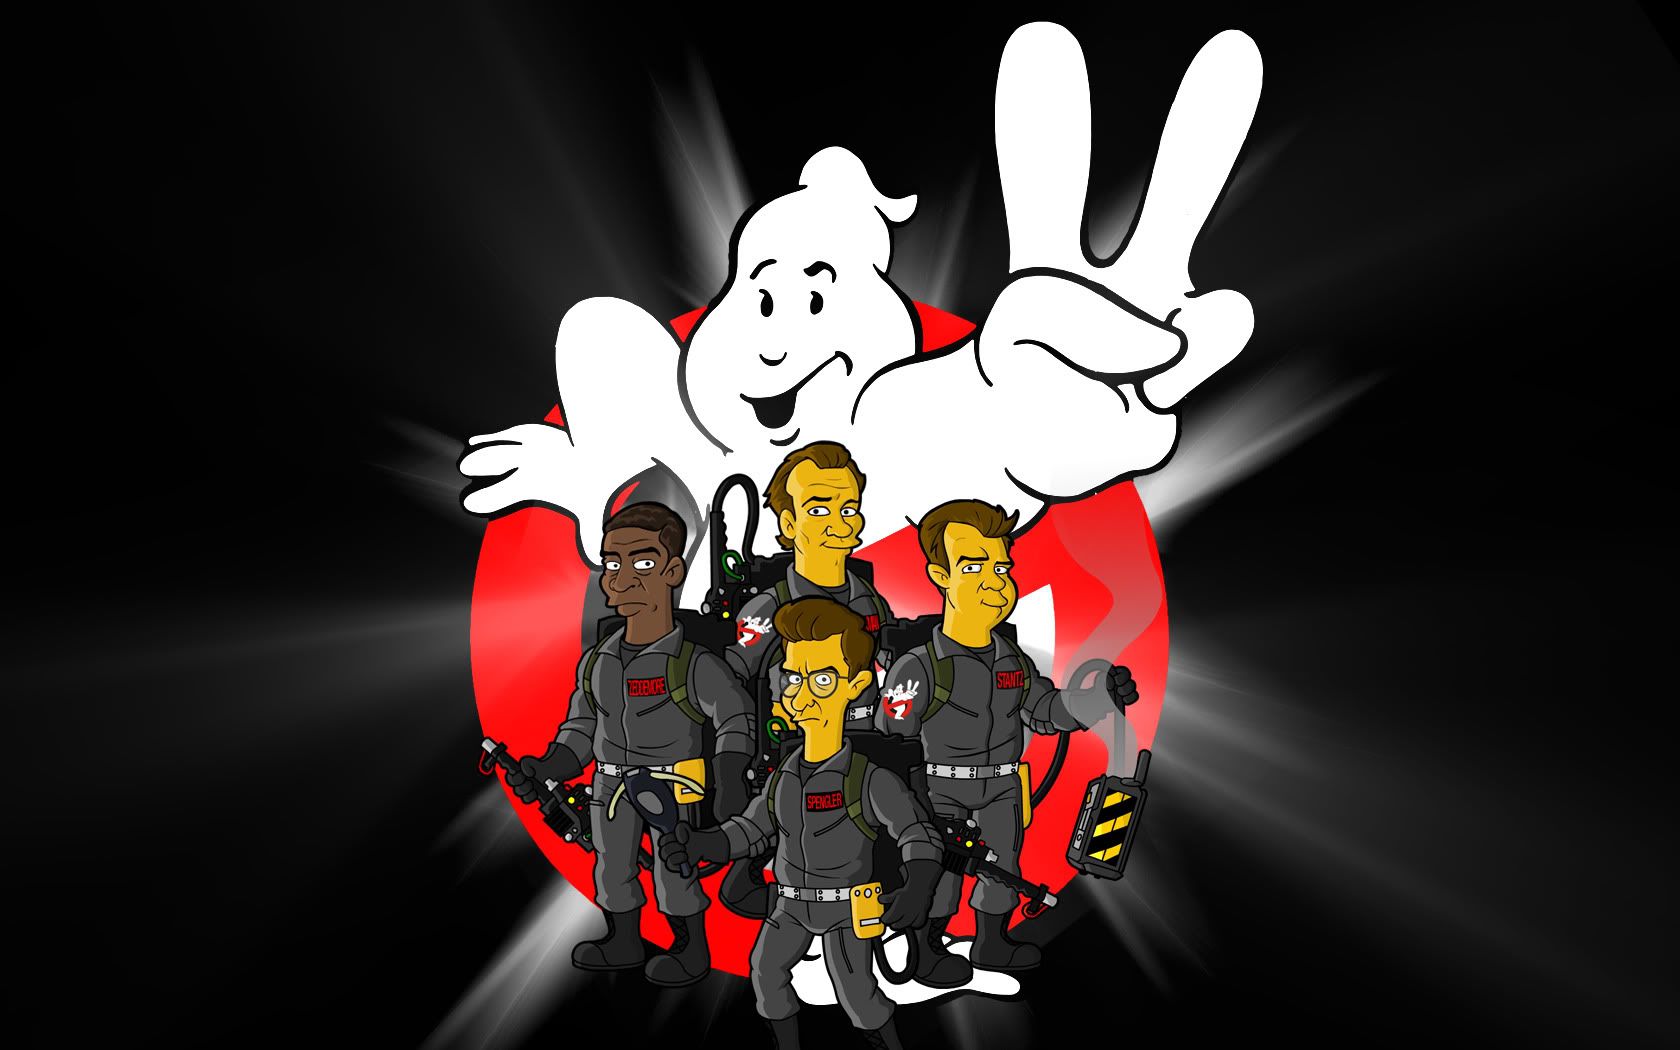 Springfield Punx Ghostbusters 2 Wallpaper Photo by Archangelboy79